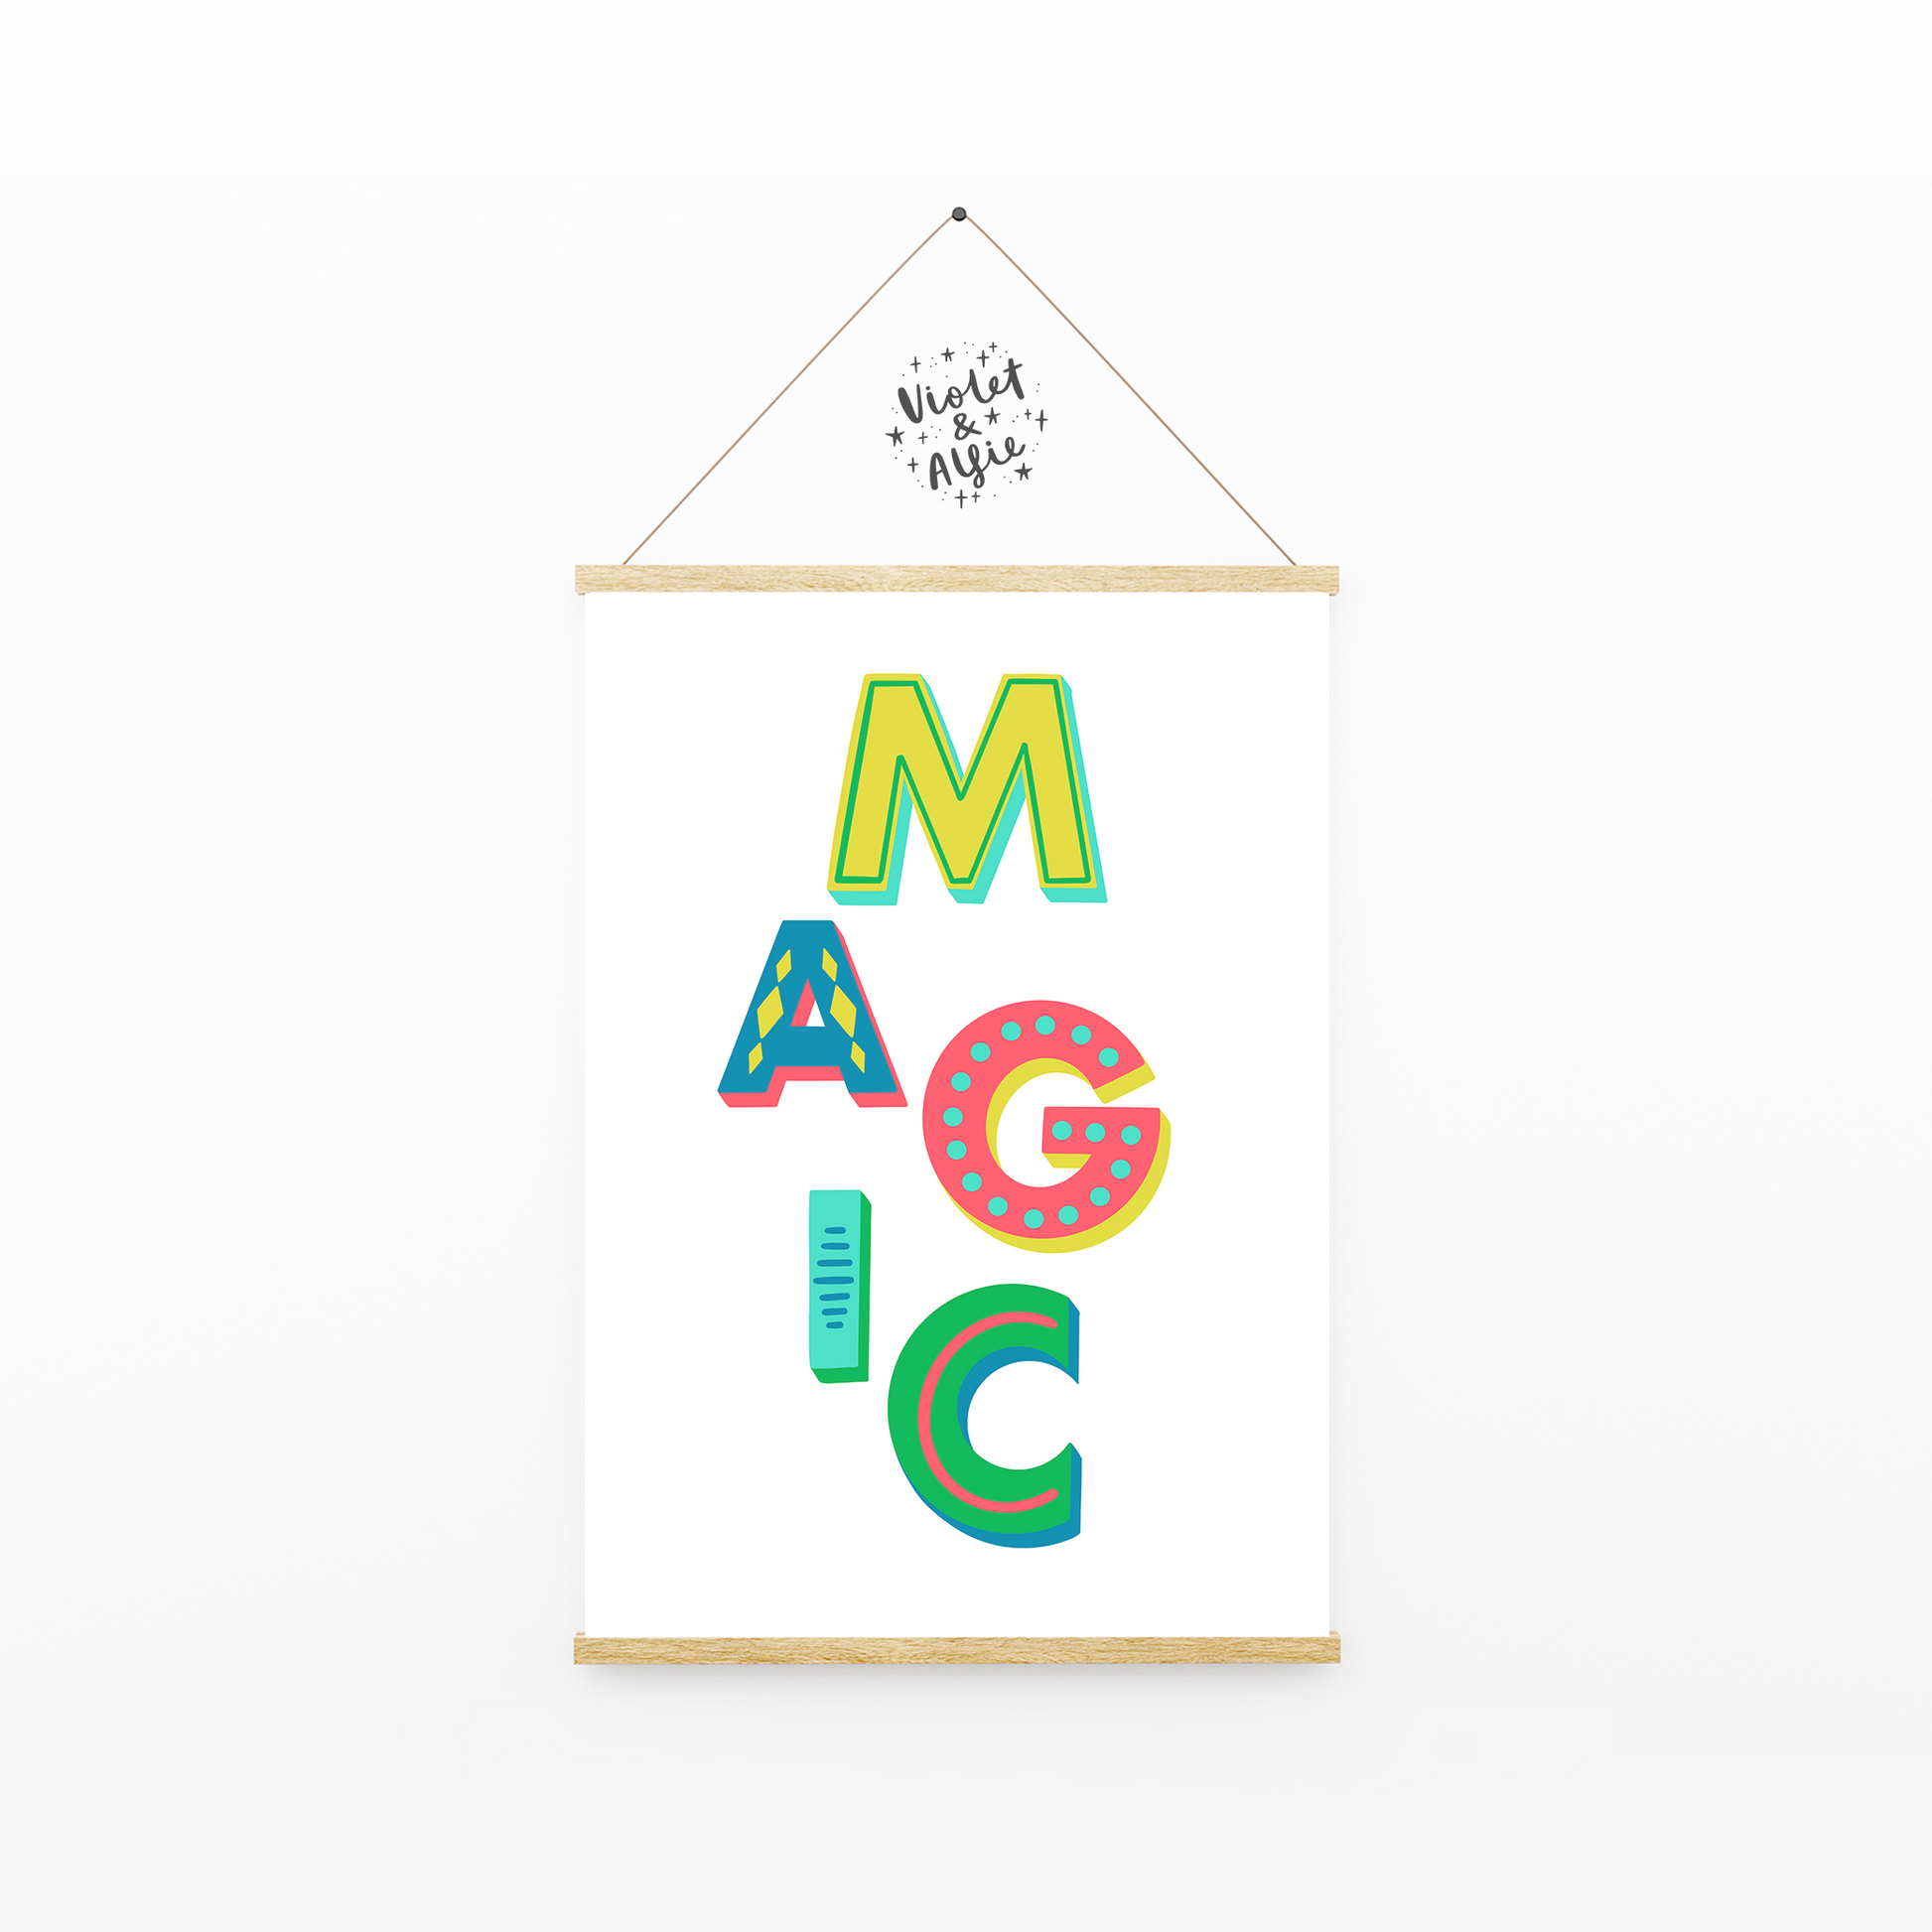 Magic print, Typographic print, colourful typography, eclectic home decor, bold wall art, quirky prints, typographic magic print, maximalist home decor, clashing colours, prints for your home, quirky prints, gallery wall decor